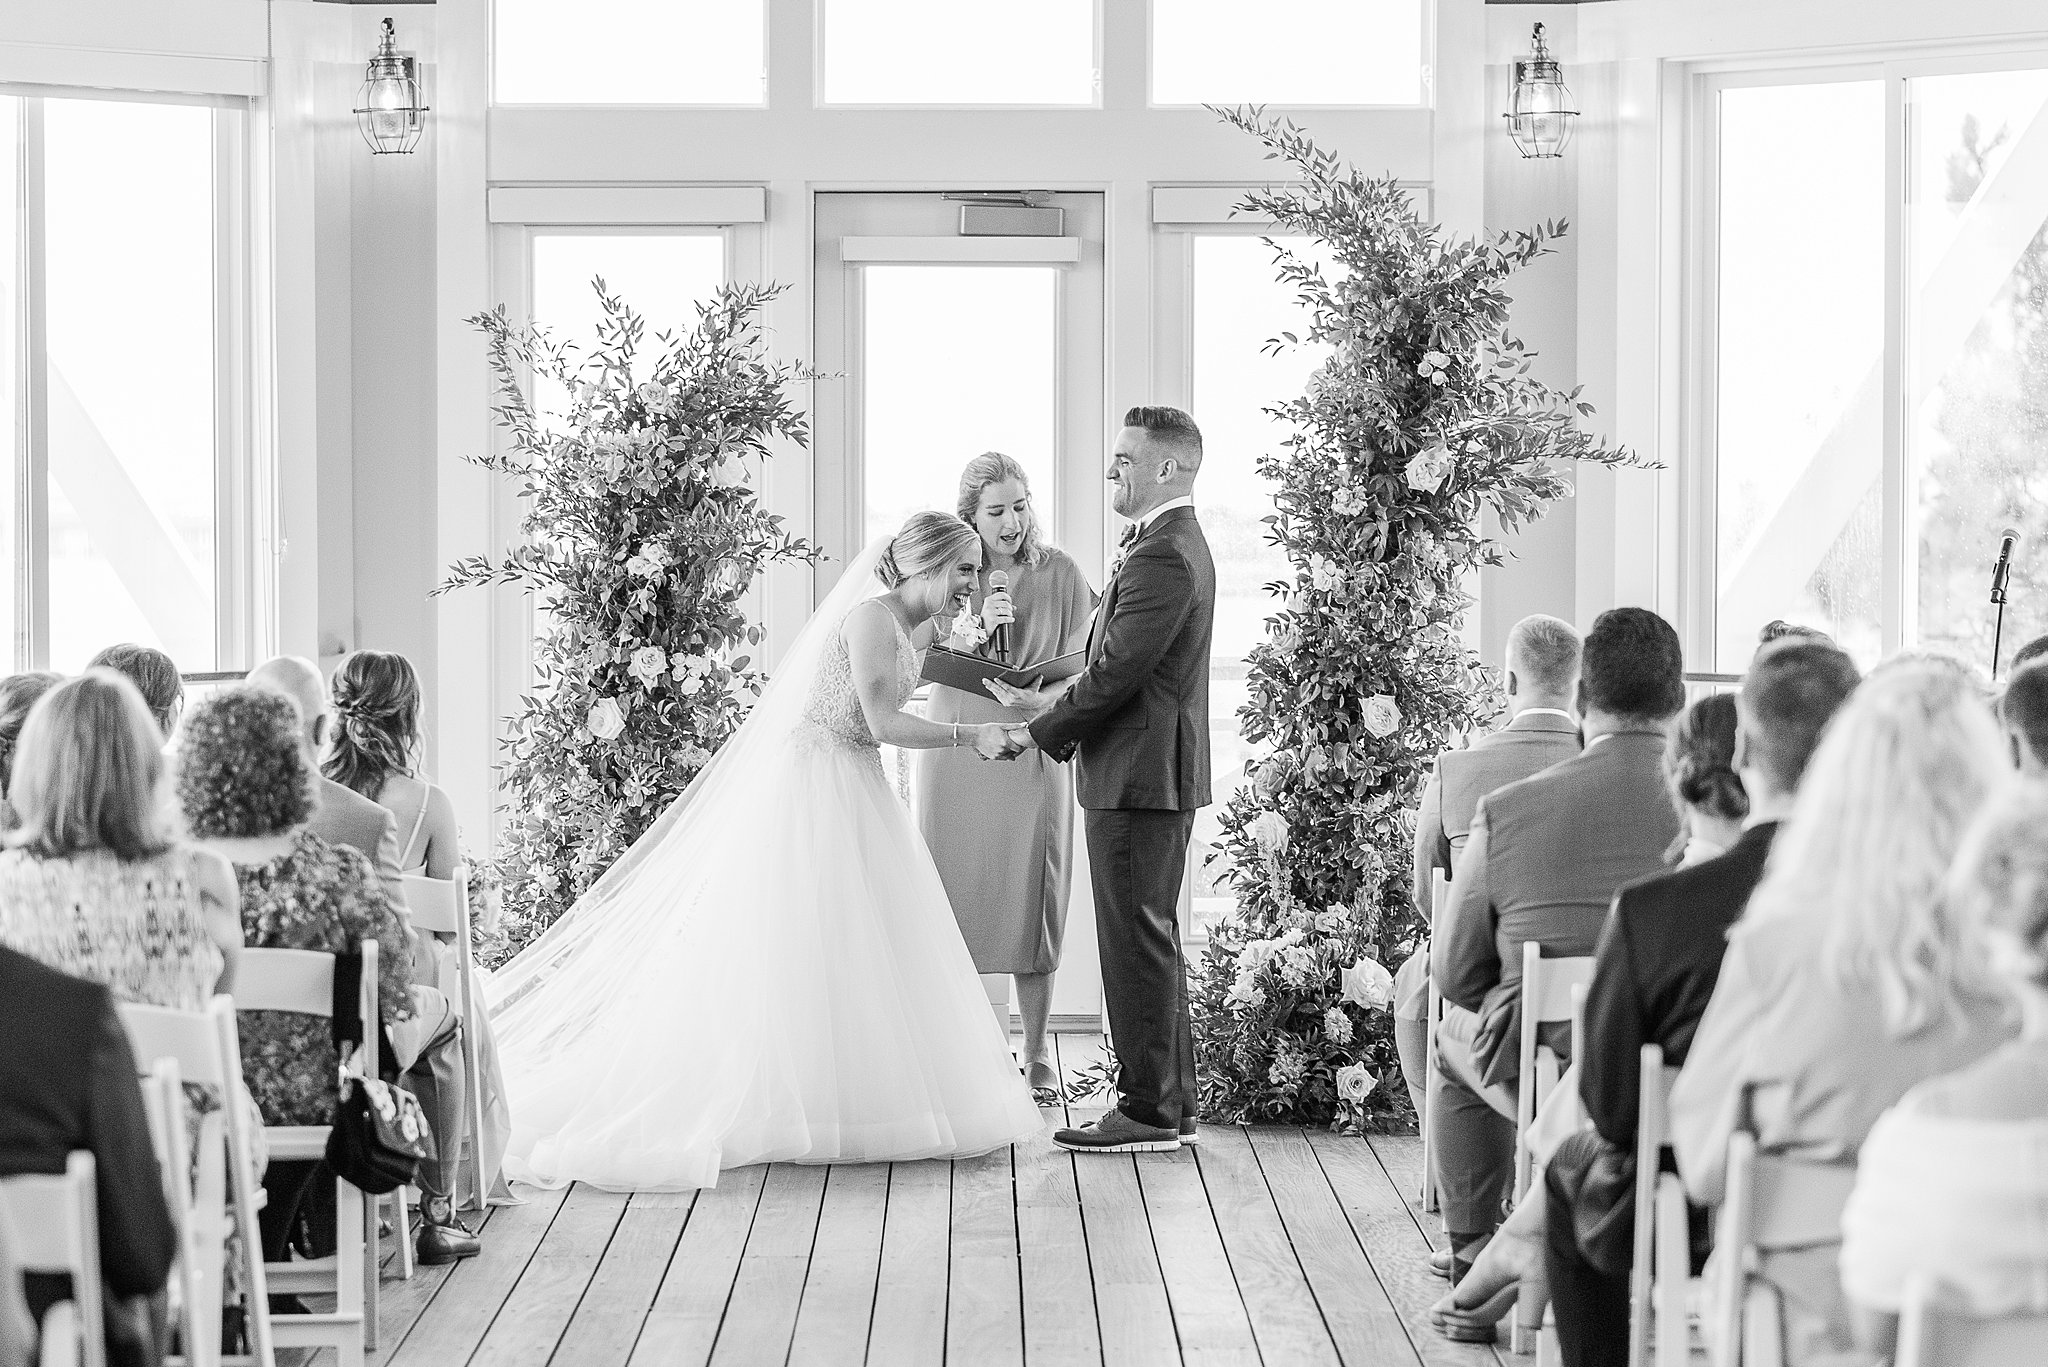 A bride and groom laugh while standing at the altar during their wedding ceremony at one of the Baltimore Hotel Wedding Venues